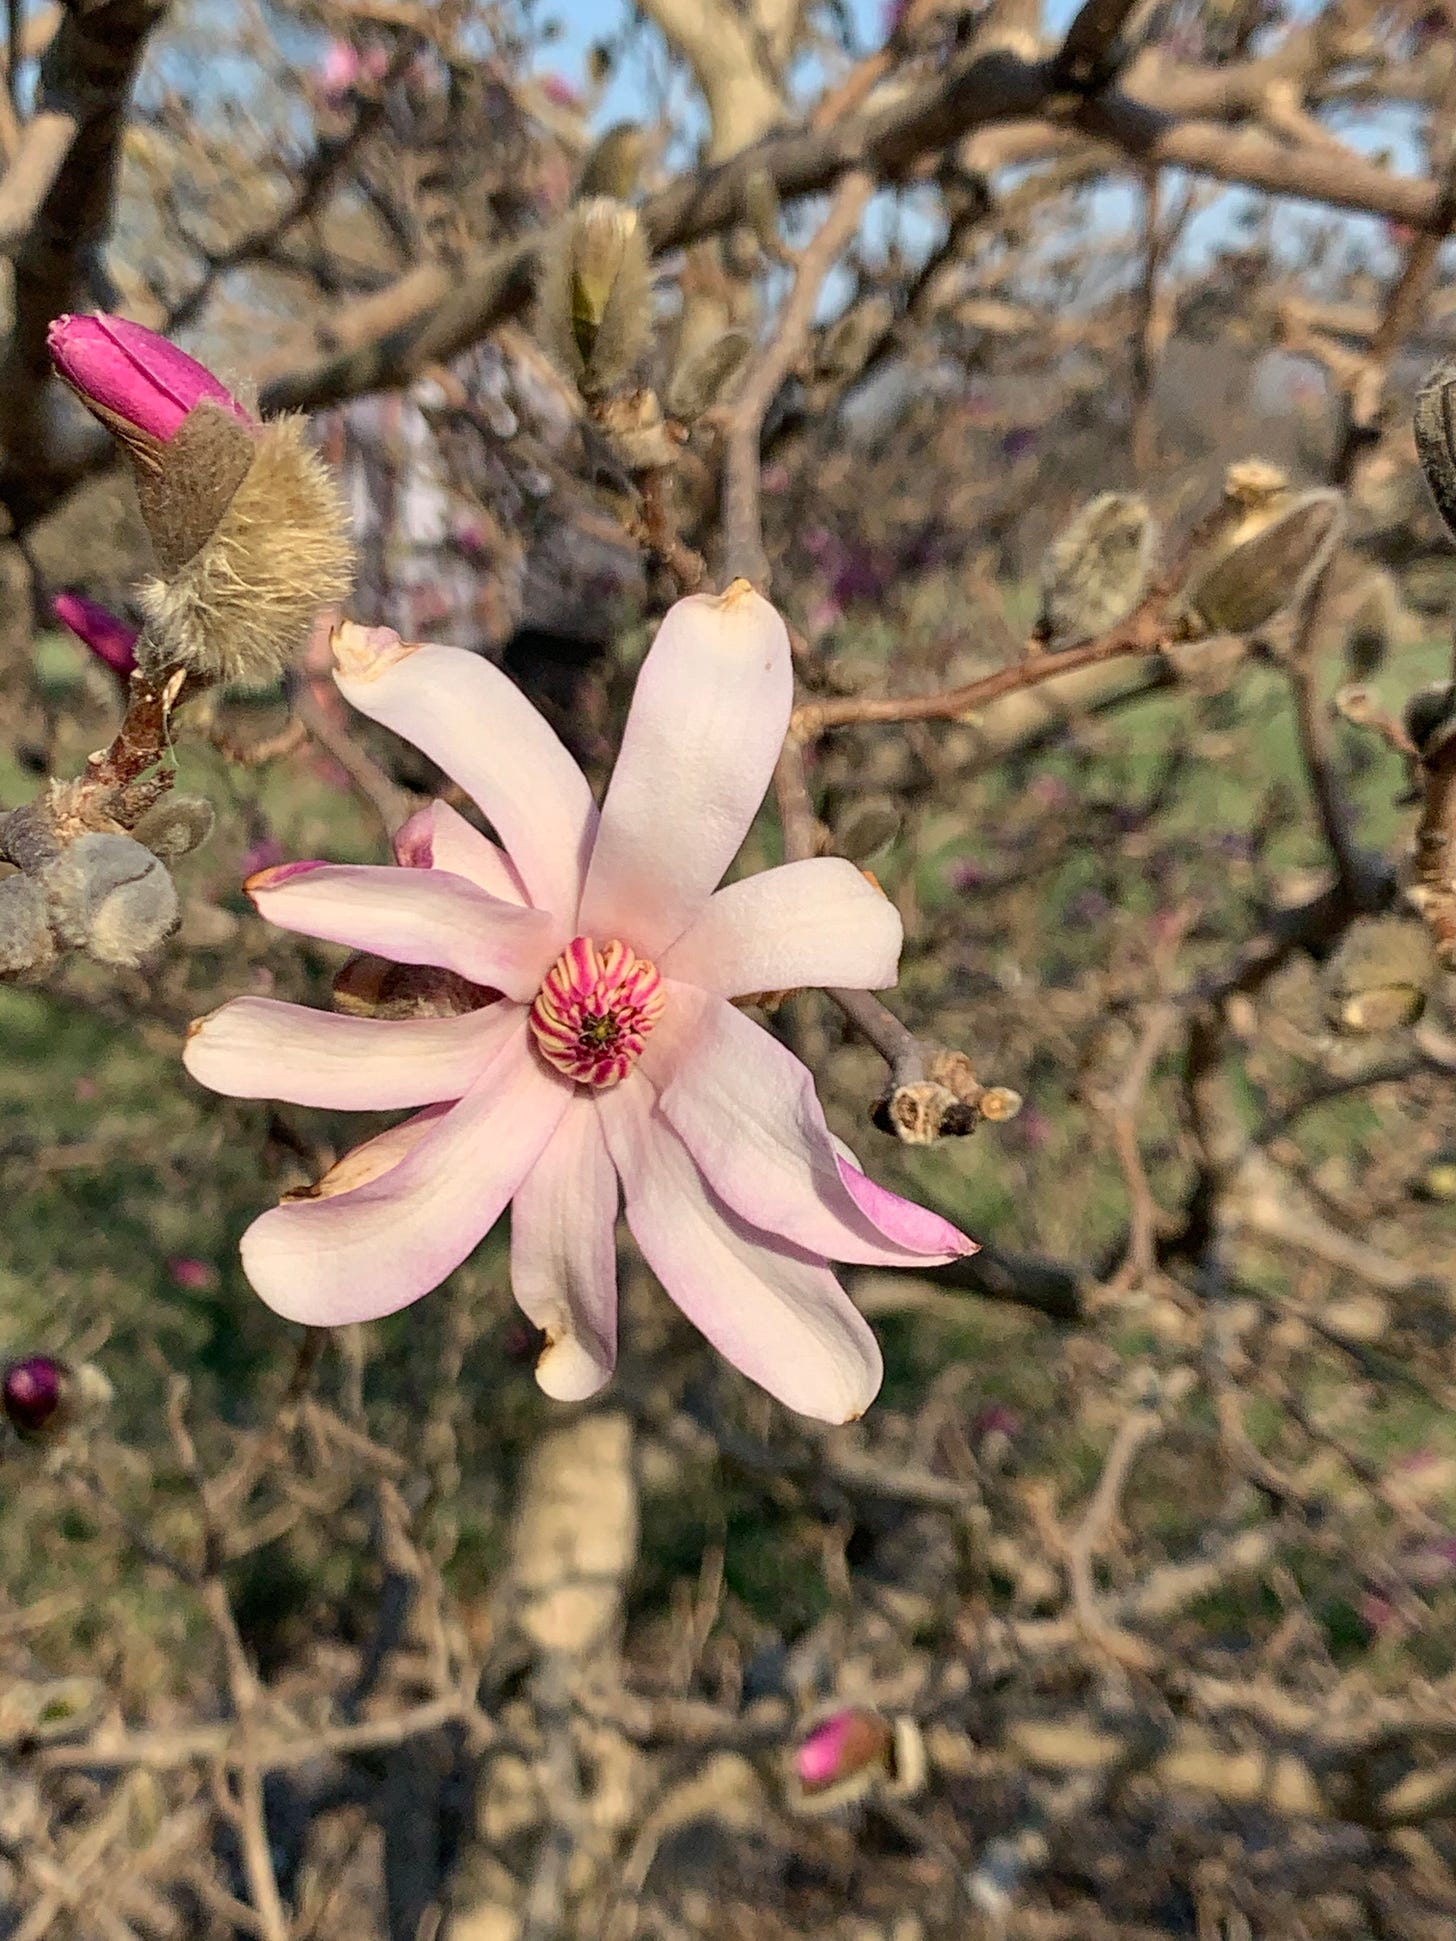 Close up of a pink petaled flower with a white and pink center. Many buds on the tree are still just starting to bloom